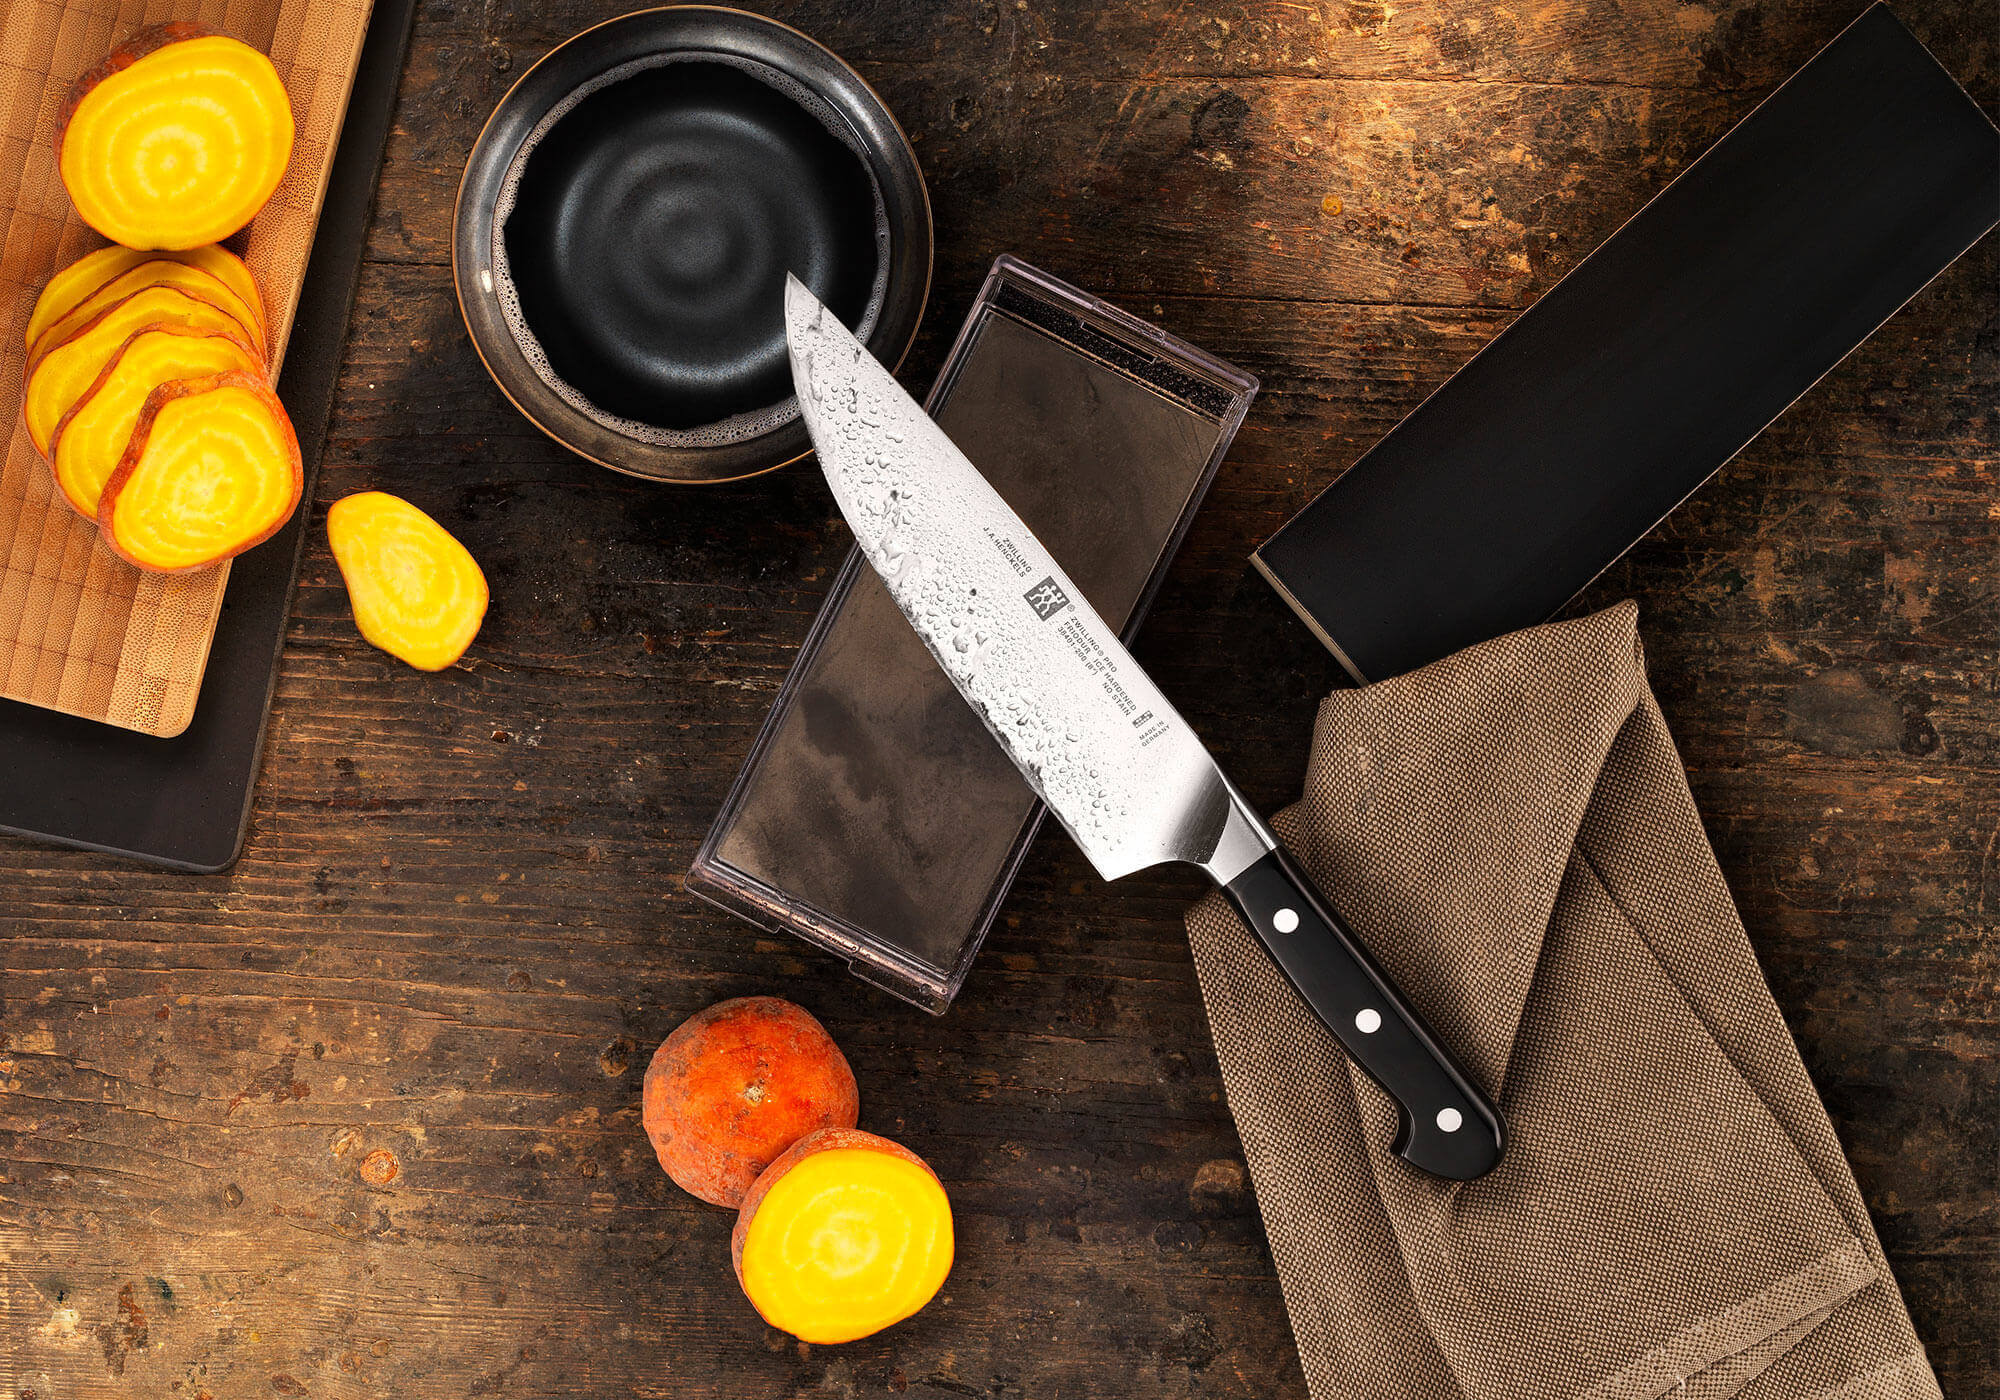 STAY SHARP – HOW TO SHARPEN YOUR KNIVES